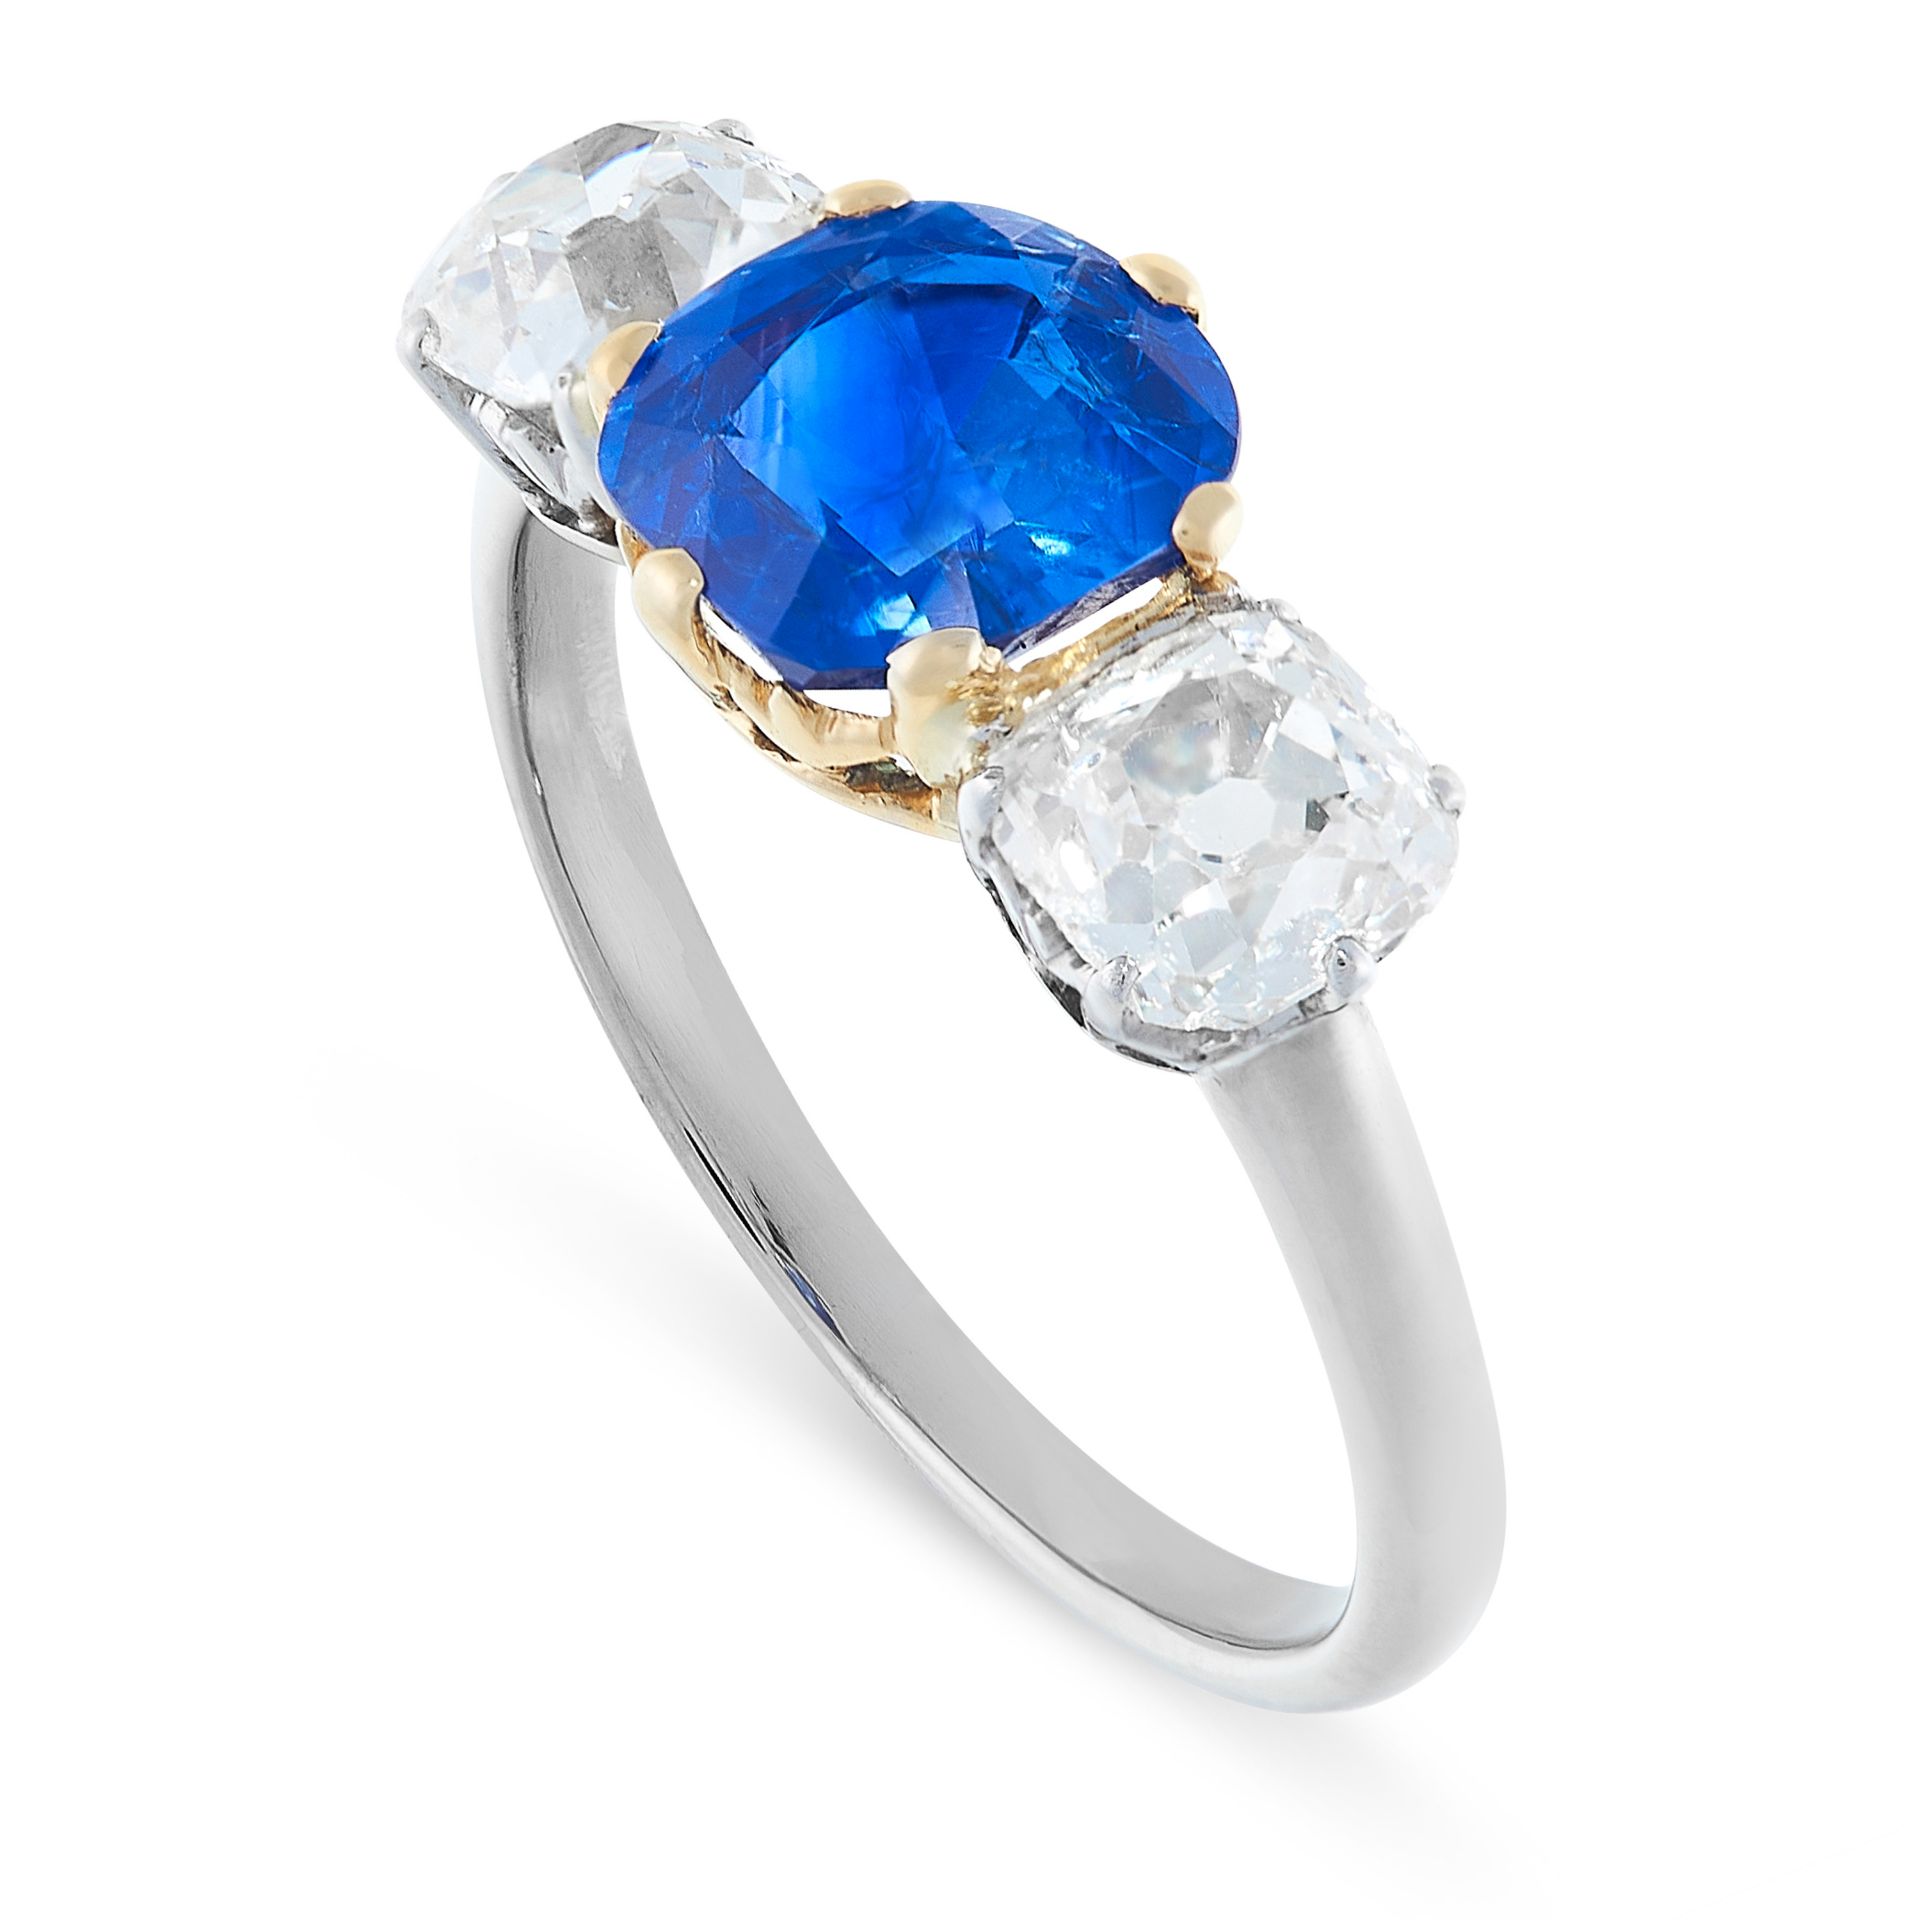 A FINE KASHMIR SAPPHIRE AND DIAMOND RING set with a cushion cut blue sapphire of 2.29 carats, - Image 2 of 2